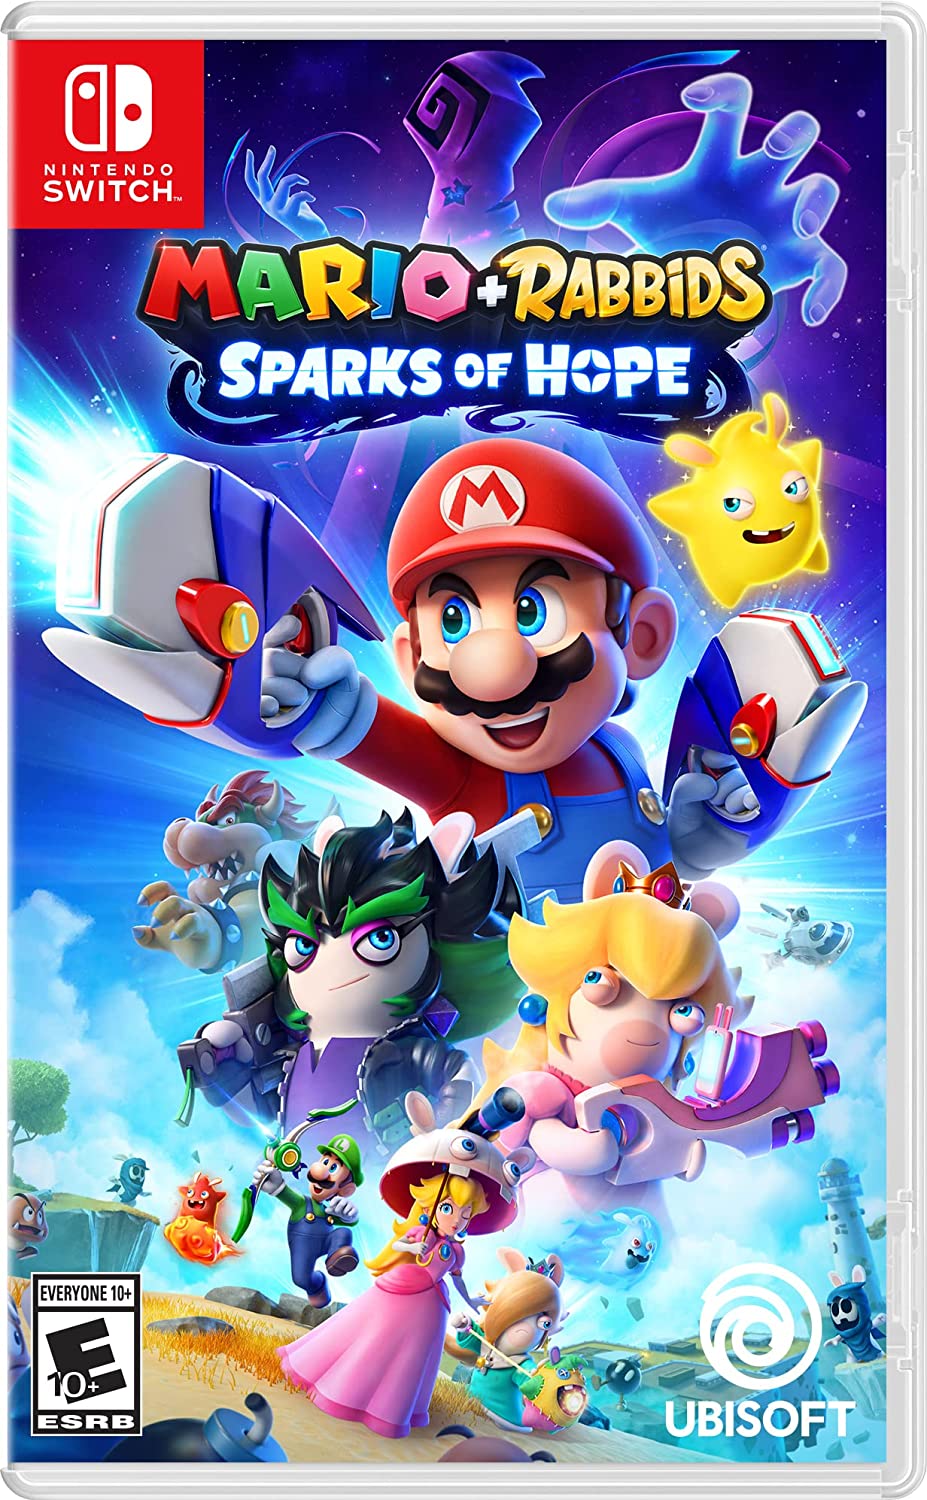 Mario and Rabbids Sparks of Hope cover artwork for Nintendo Switch.